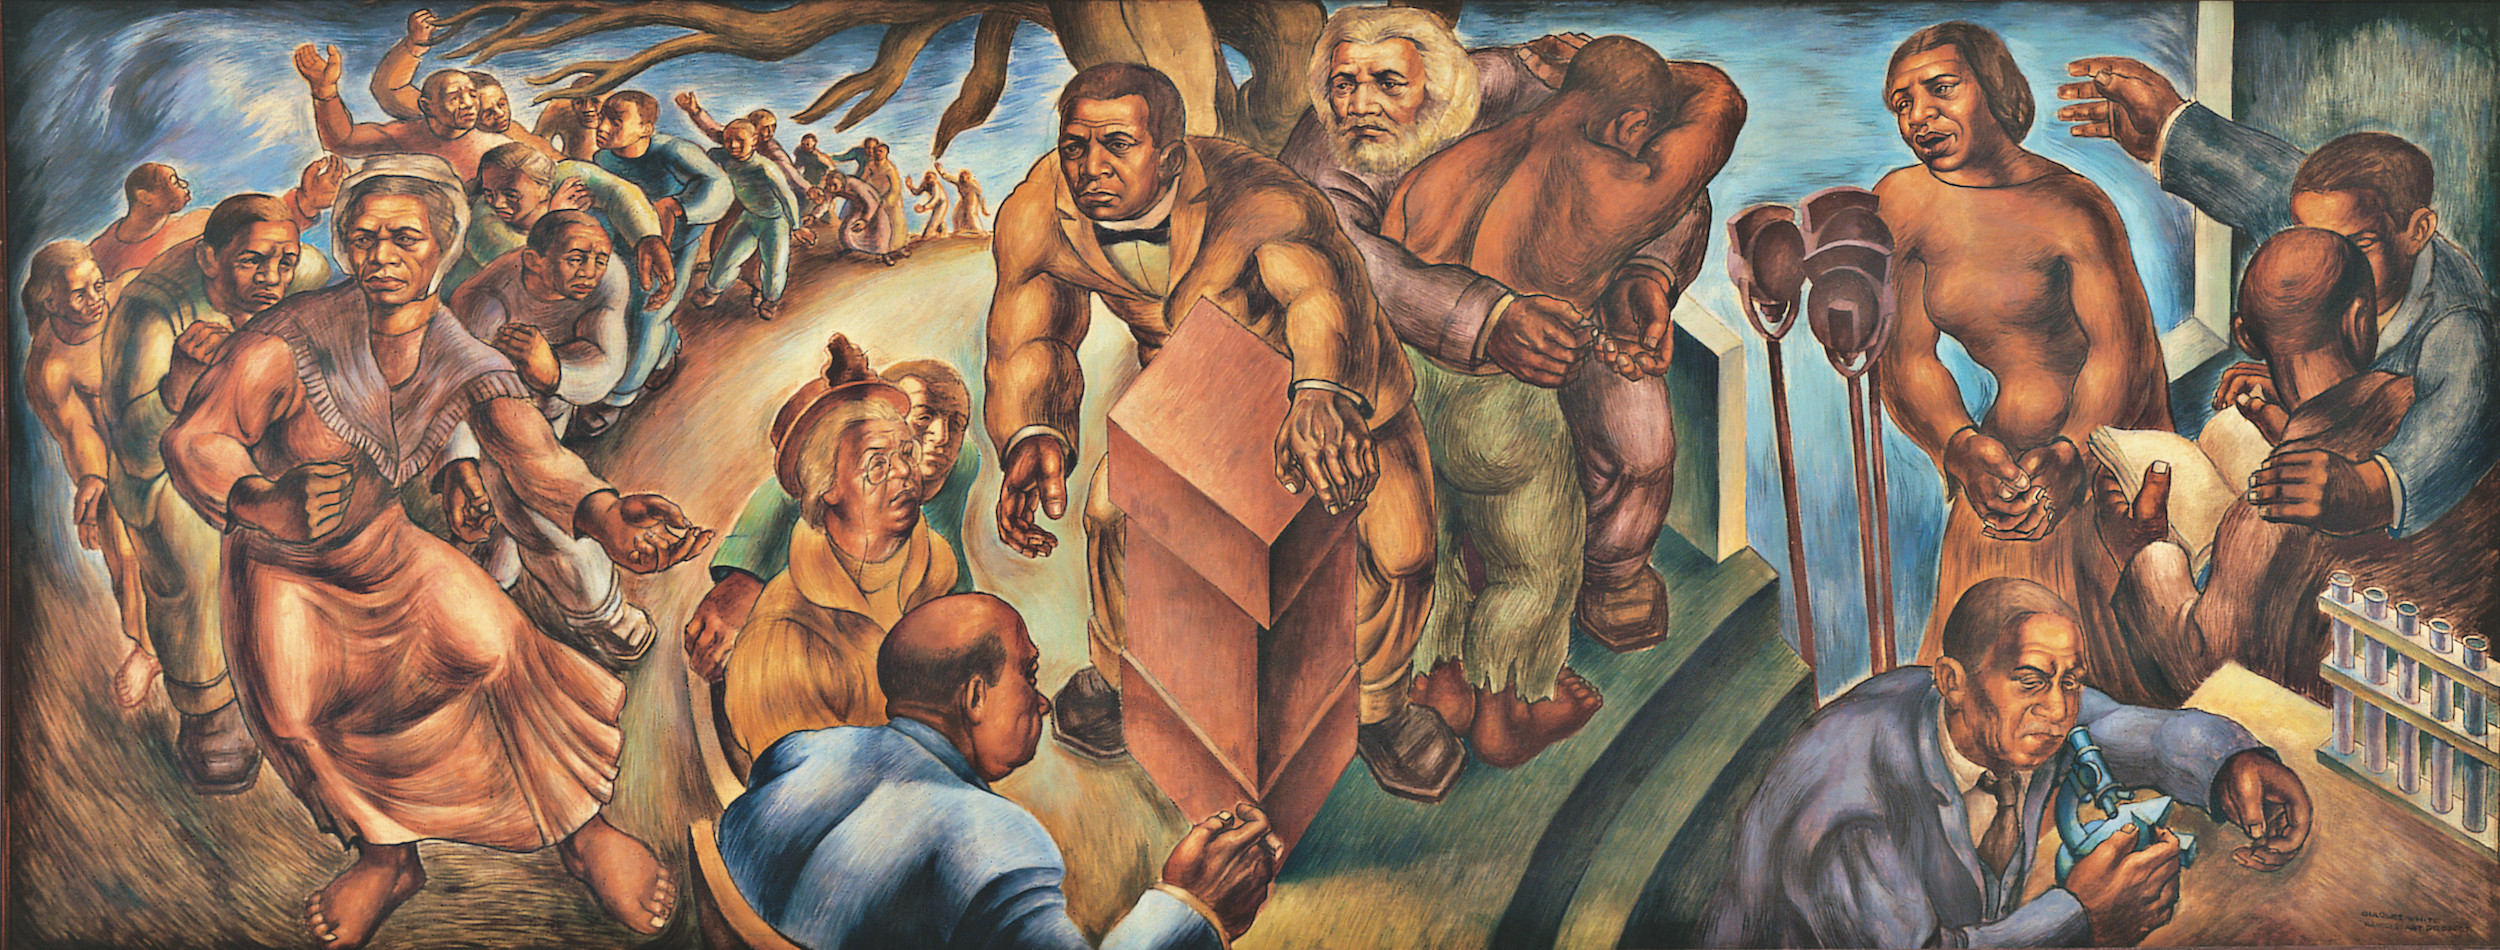 Charles White (American, 1918-1979). Five Great American Negroes. 1939. Oil on canvas, 60 x 155″ (152.4 x 393.7 cm). From the Collection of the Howard University Gallery of Art, Washington D.C.© The Charles White Archives/ Photo: Gregory R. Staley